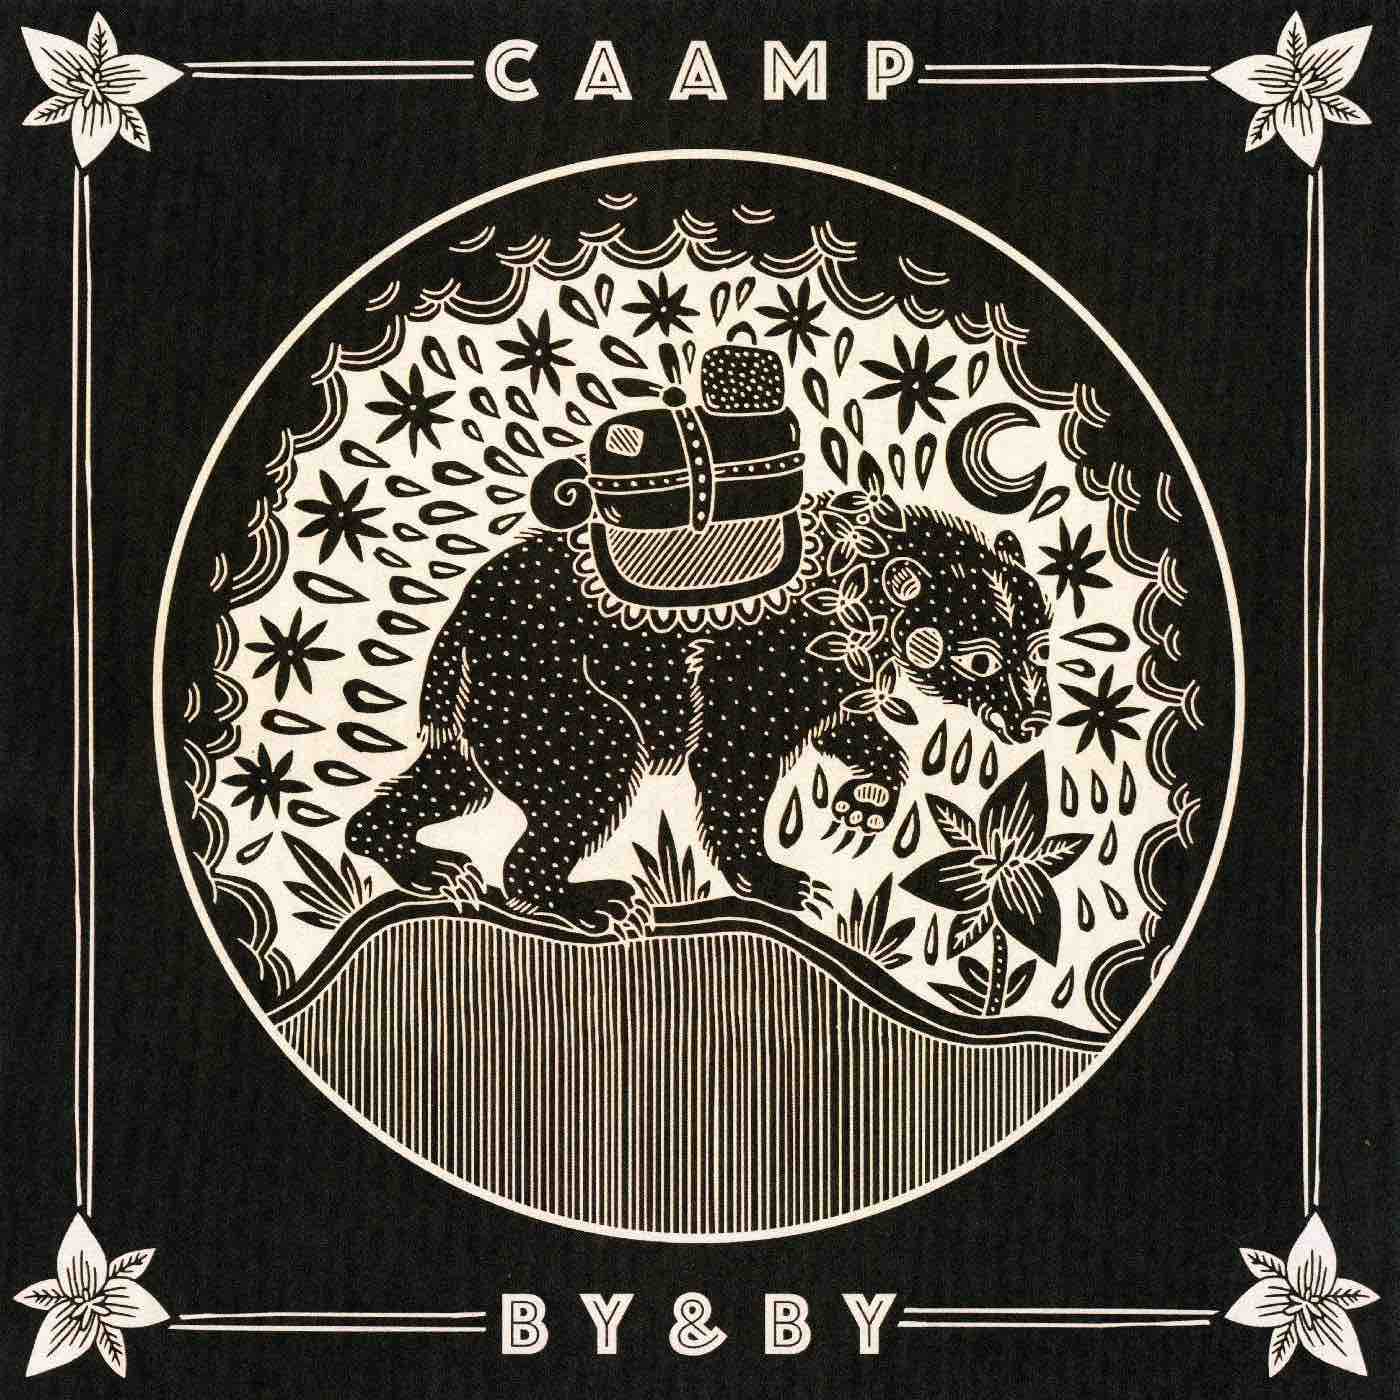 Caamp - By & By LP